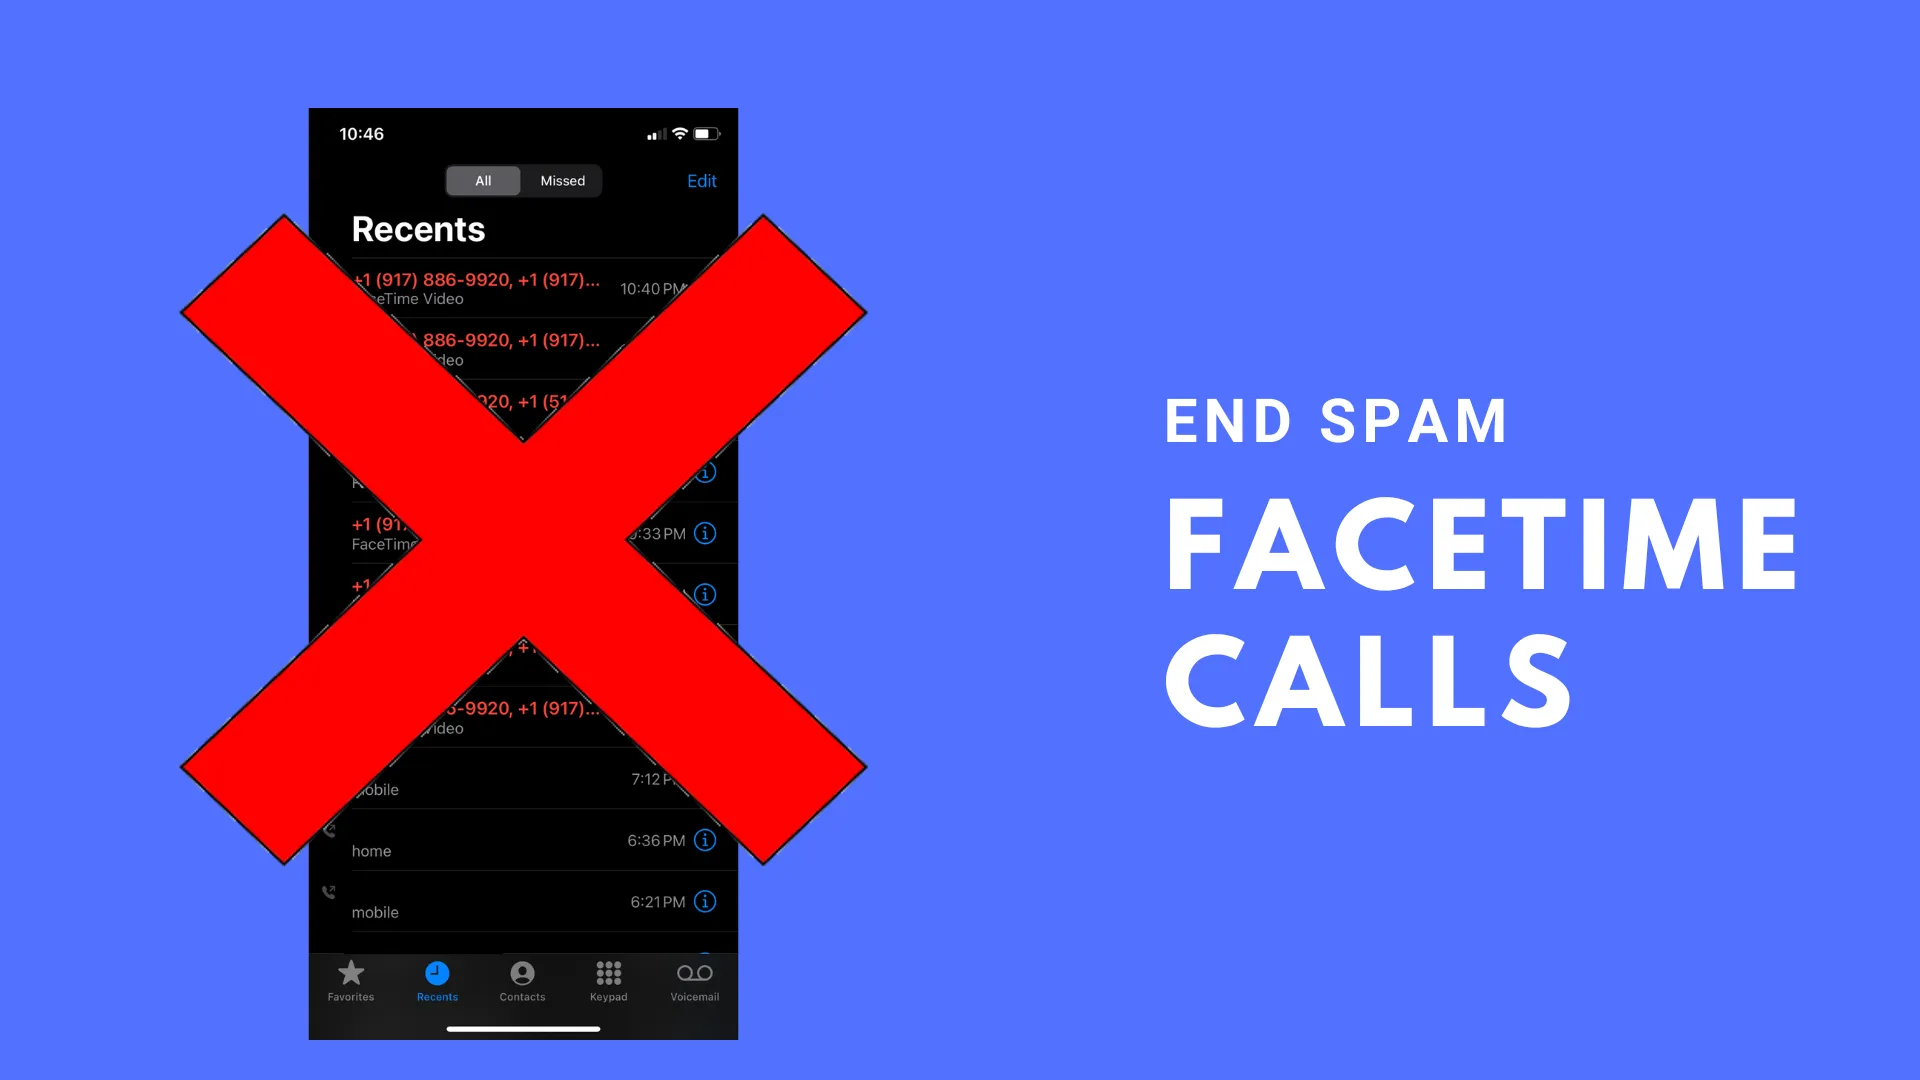 How To End and Manage Spam Facetime Calls